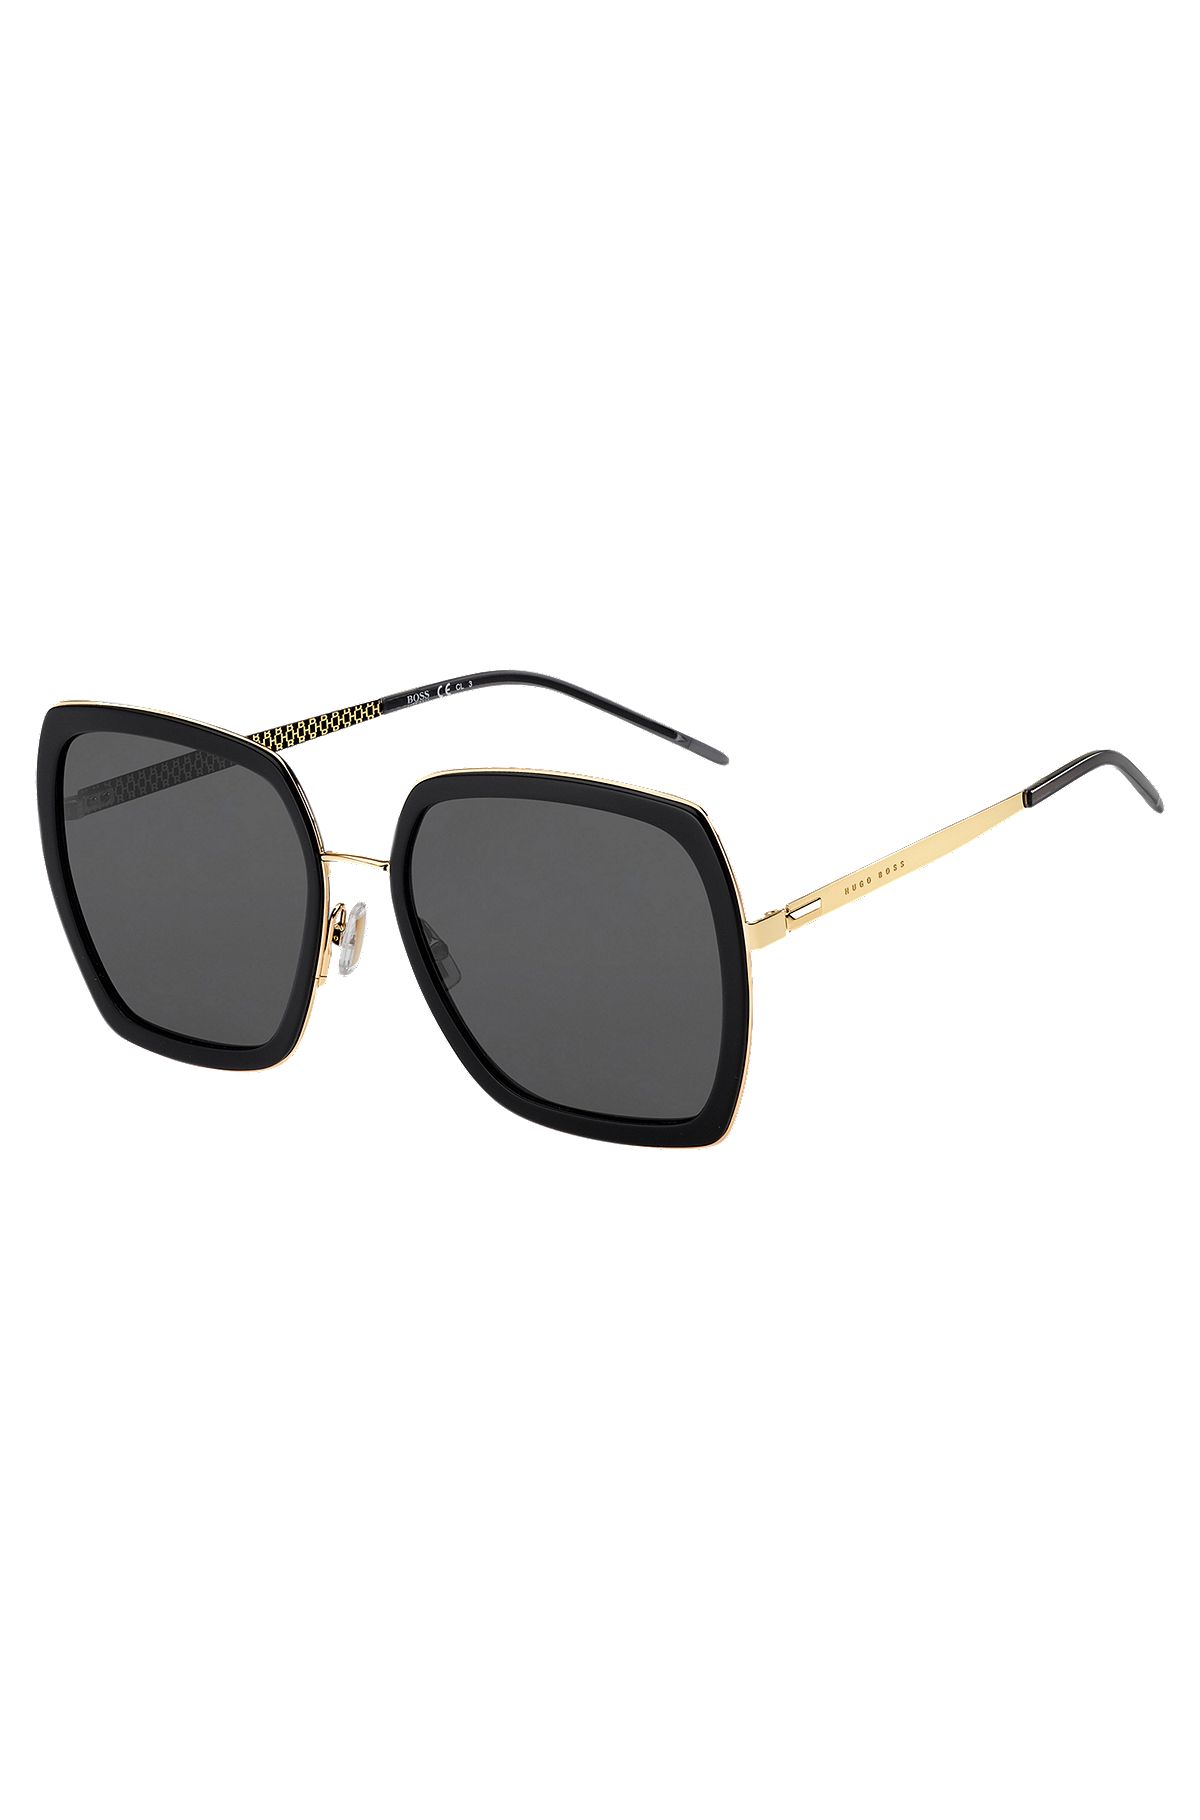 Statement sunglasses in black and gold-tone effects, Assorted-Pre-Pack